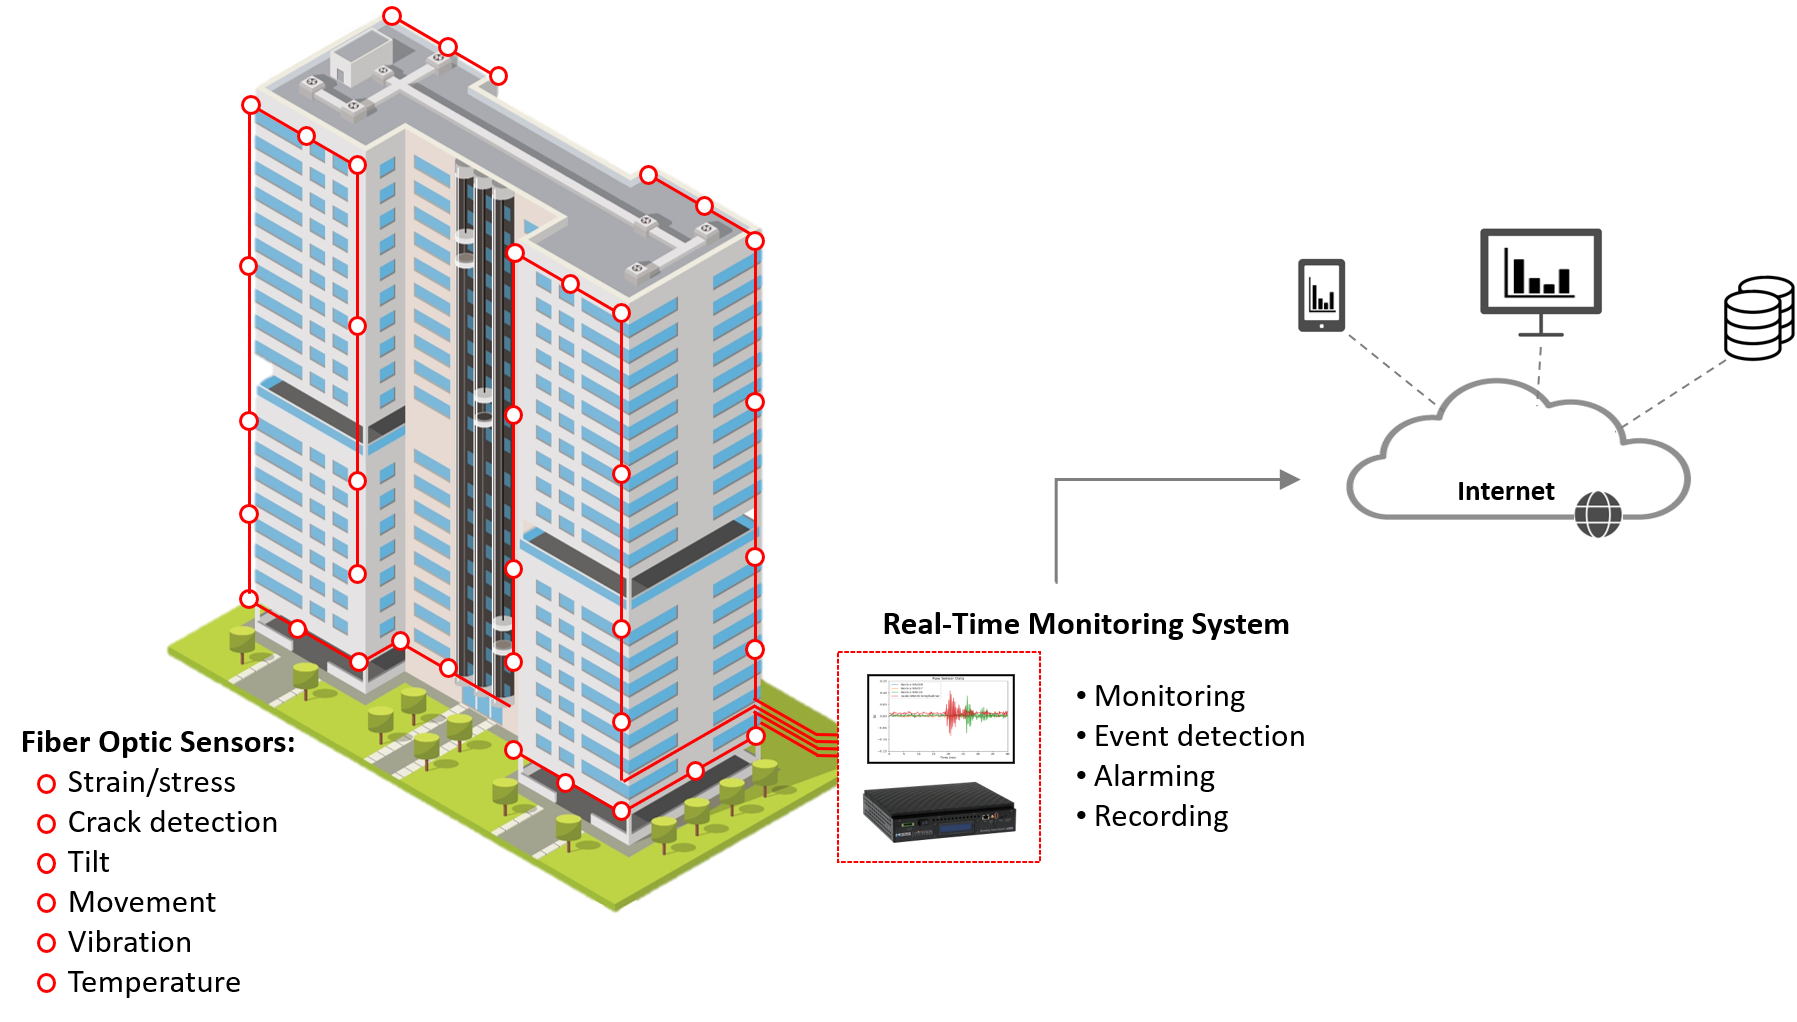 Building monitoring system